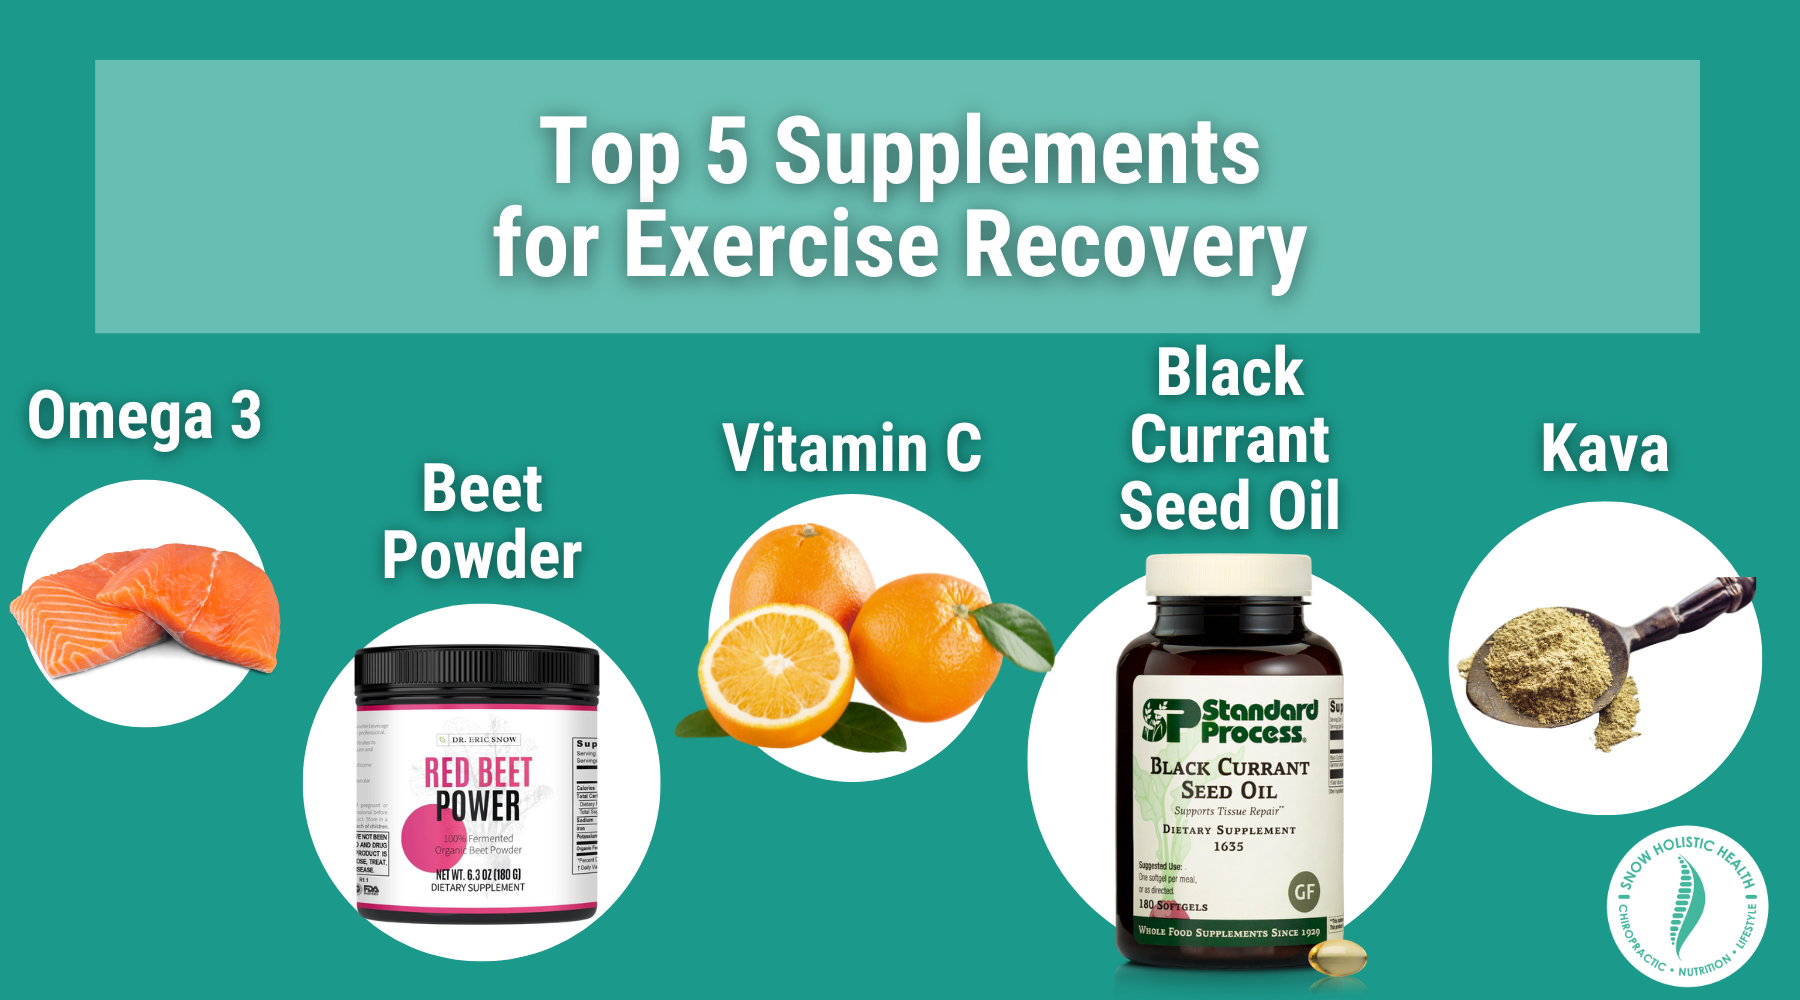 Image with caption "Top 5 Supplements for Exercise Recovery" with images of Omega 3 Fish Oil, Red Beet Powder, Vitamin C oranges, Black Currant Seed Oil, and Kava